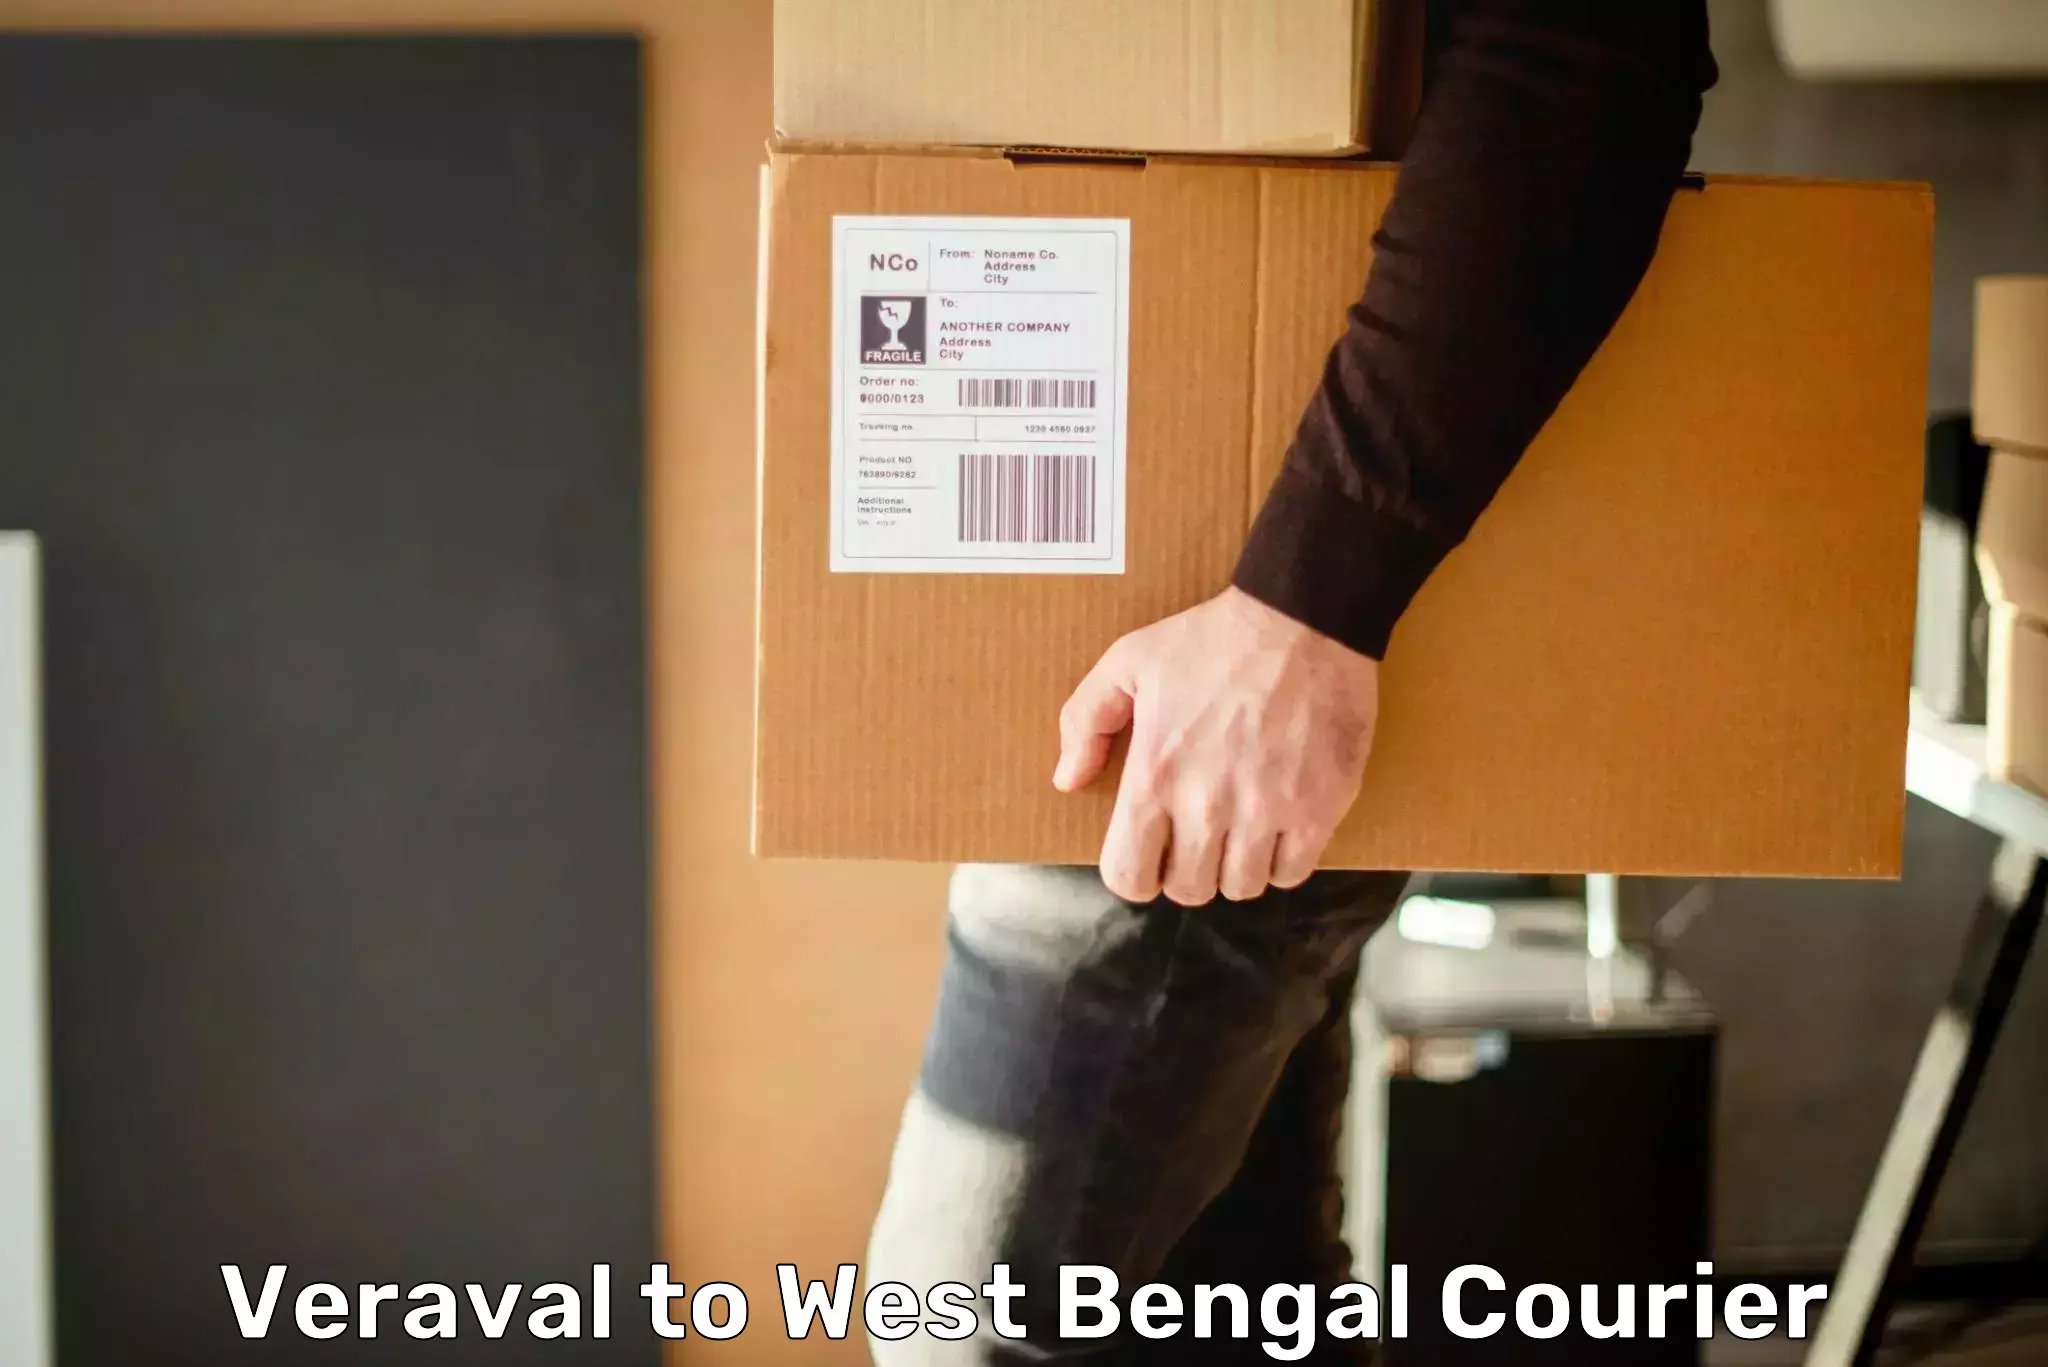 Cash on delivery service Veraval to West Bengal